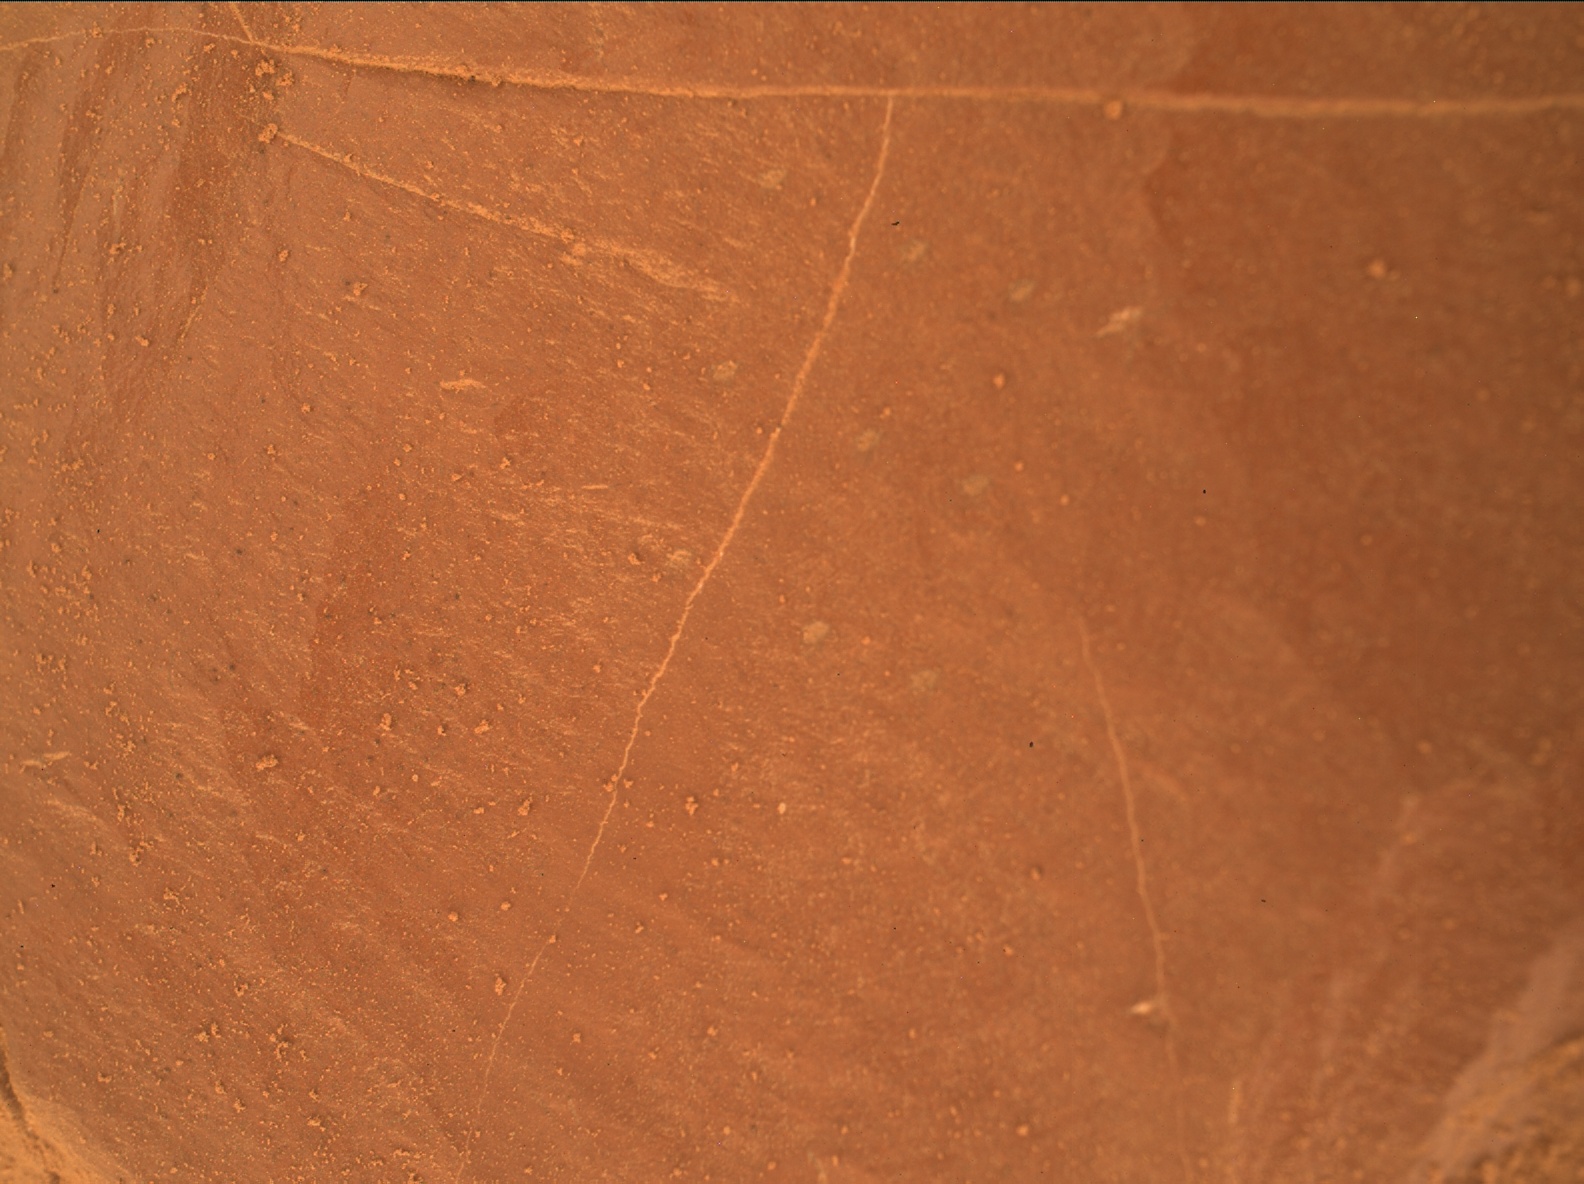 Nasa's Mars rover Curiosity acquired this image using its Mars Hand Lens Imager (MAHLI) on Sol 2102